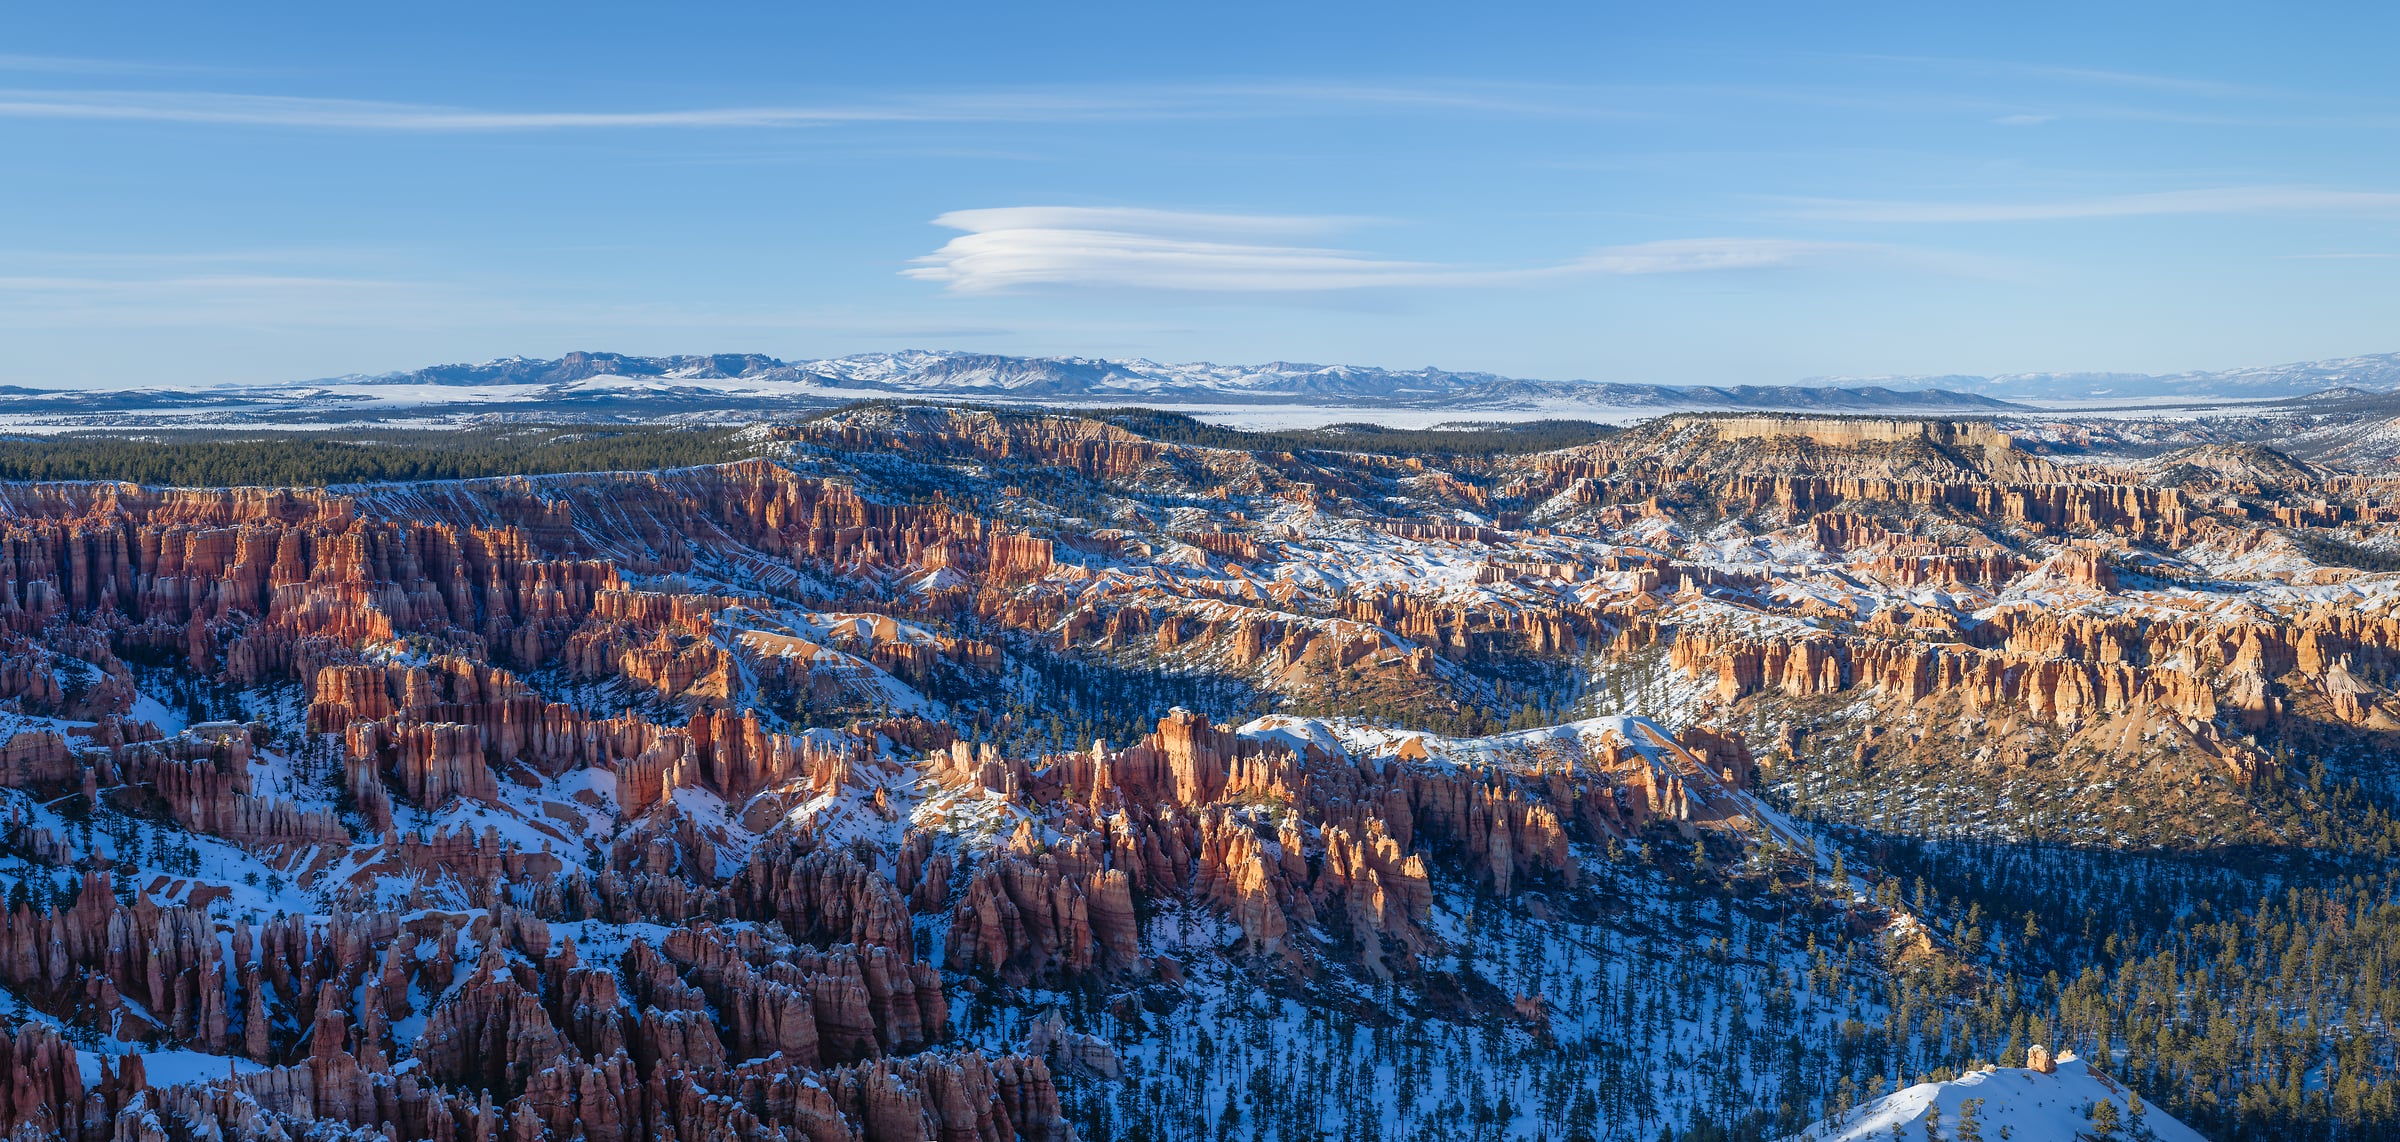 535 megapixels! A very high resolution, large-format VAST photo print of Bryce Canyon after a snowfall; landscape photograph created by Greg Probst in Bryce Canyon National Park.